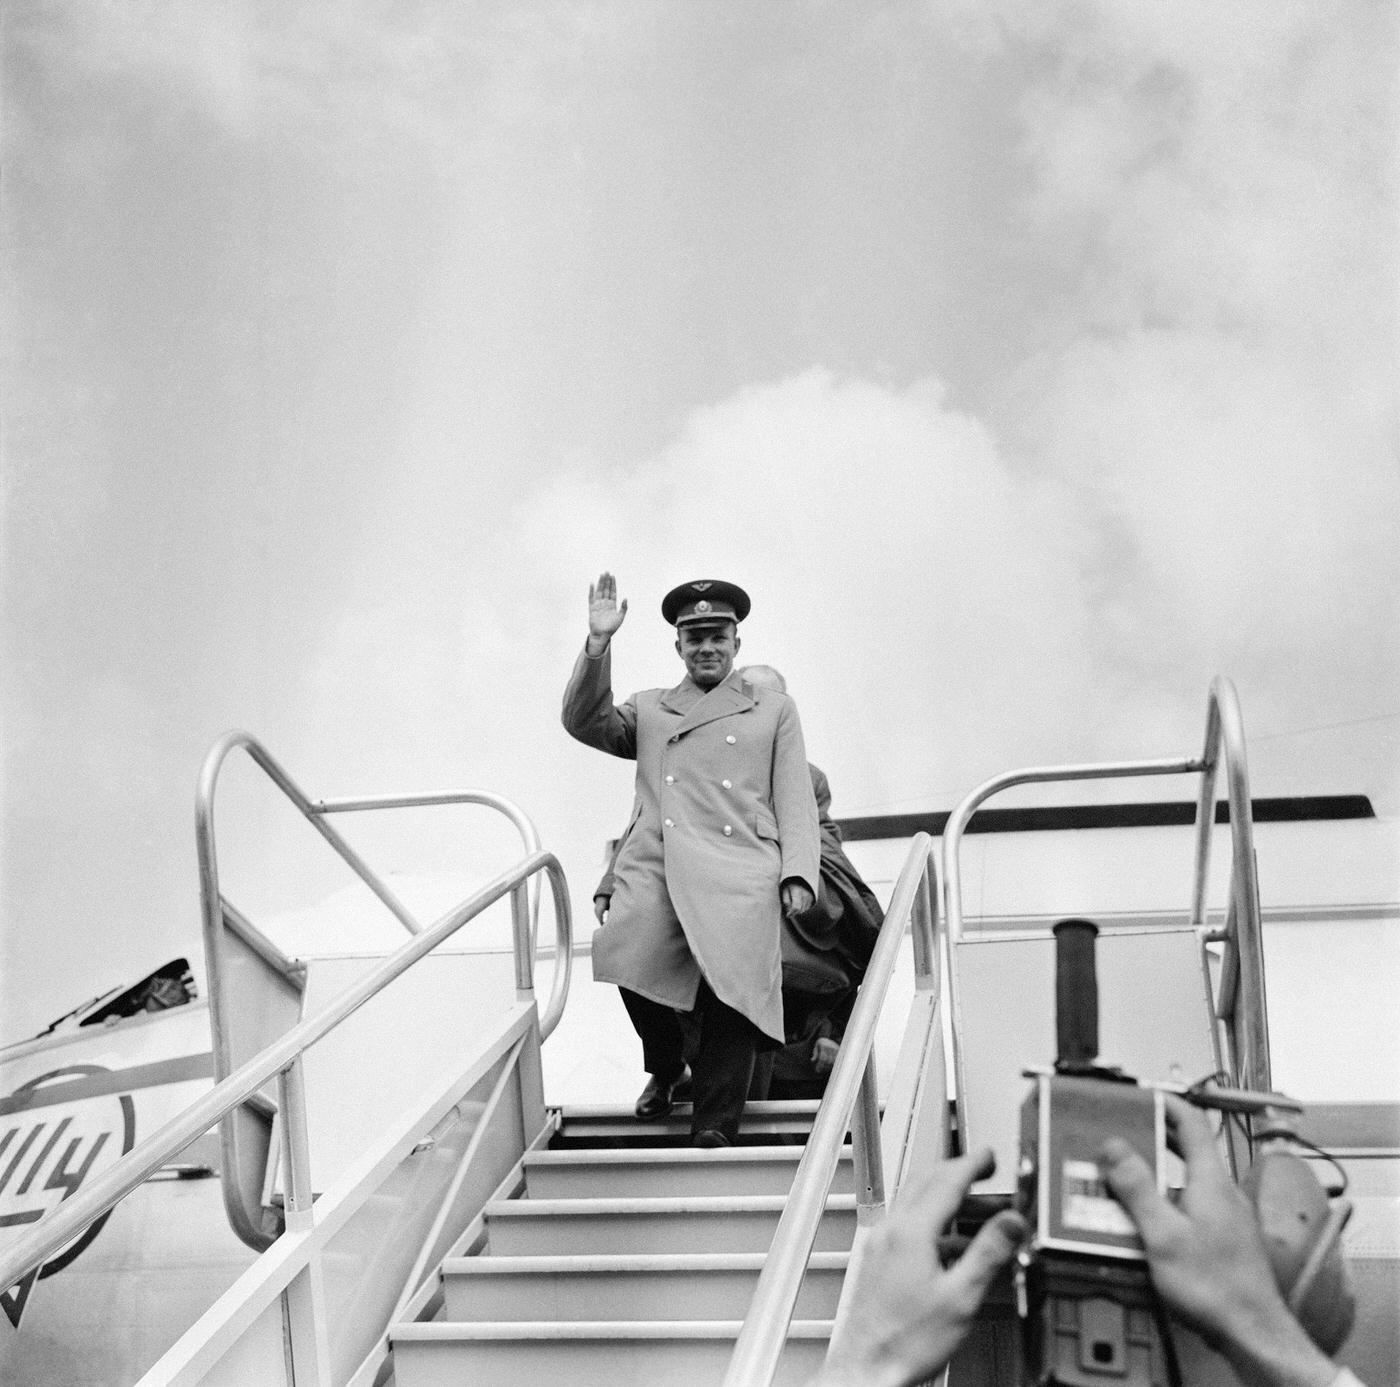 Russian Cosmonaut Yuri Gagarin arriving at Paris Le Bourget Airport to take part in the XIVth Astronautics Conference, 1963